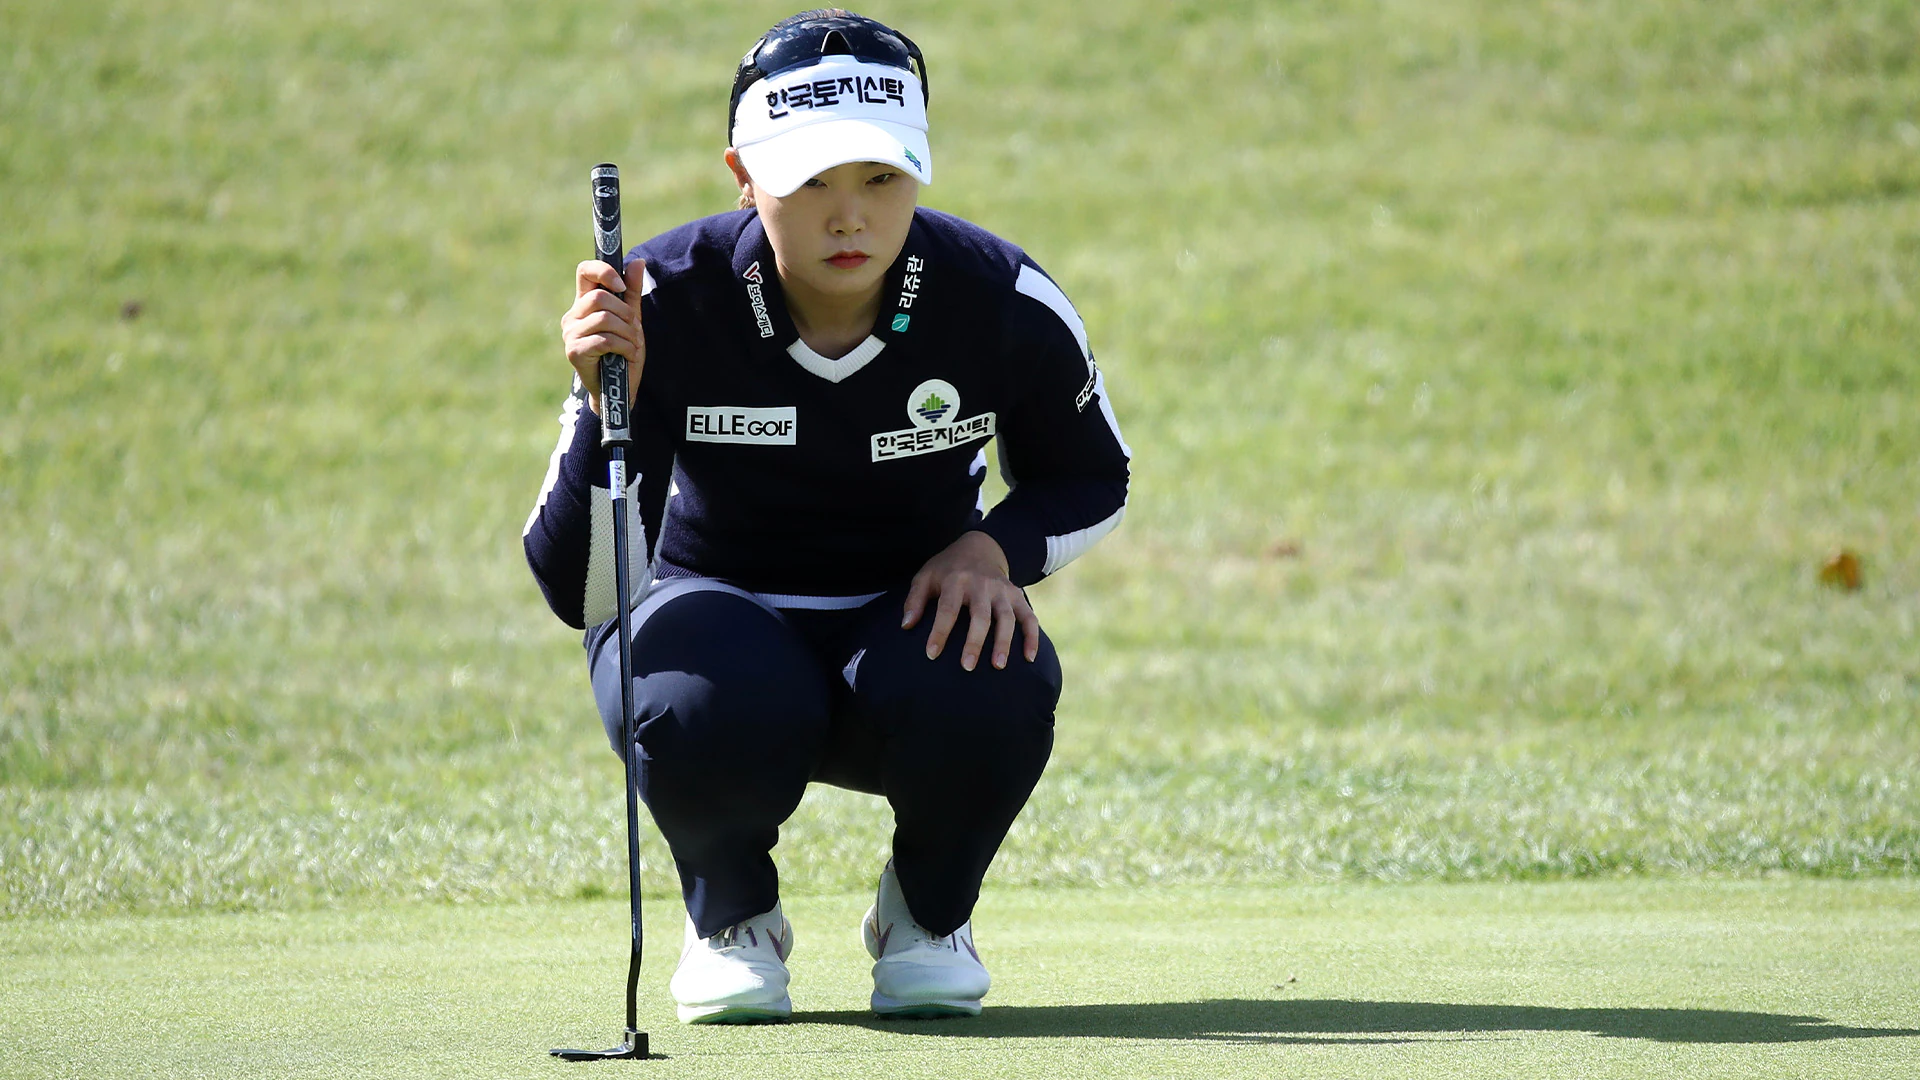 Hee Jeong Lim rides bogey-free three rounds to BMW Ladies Championship lead